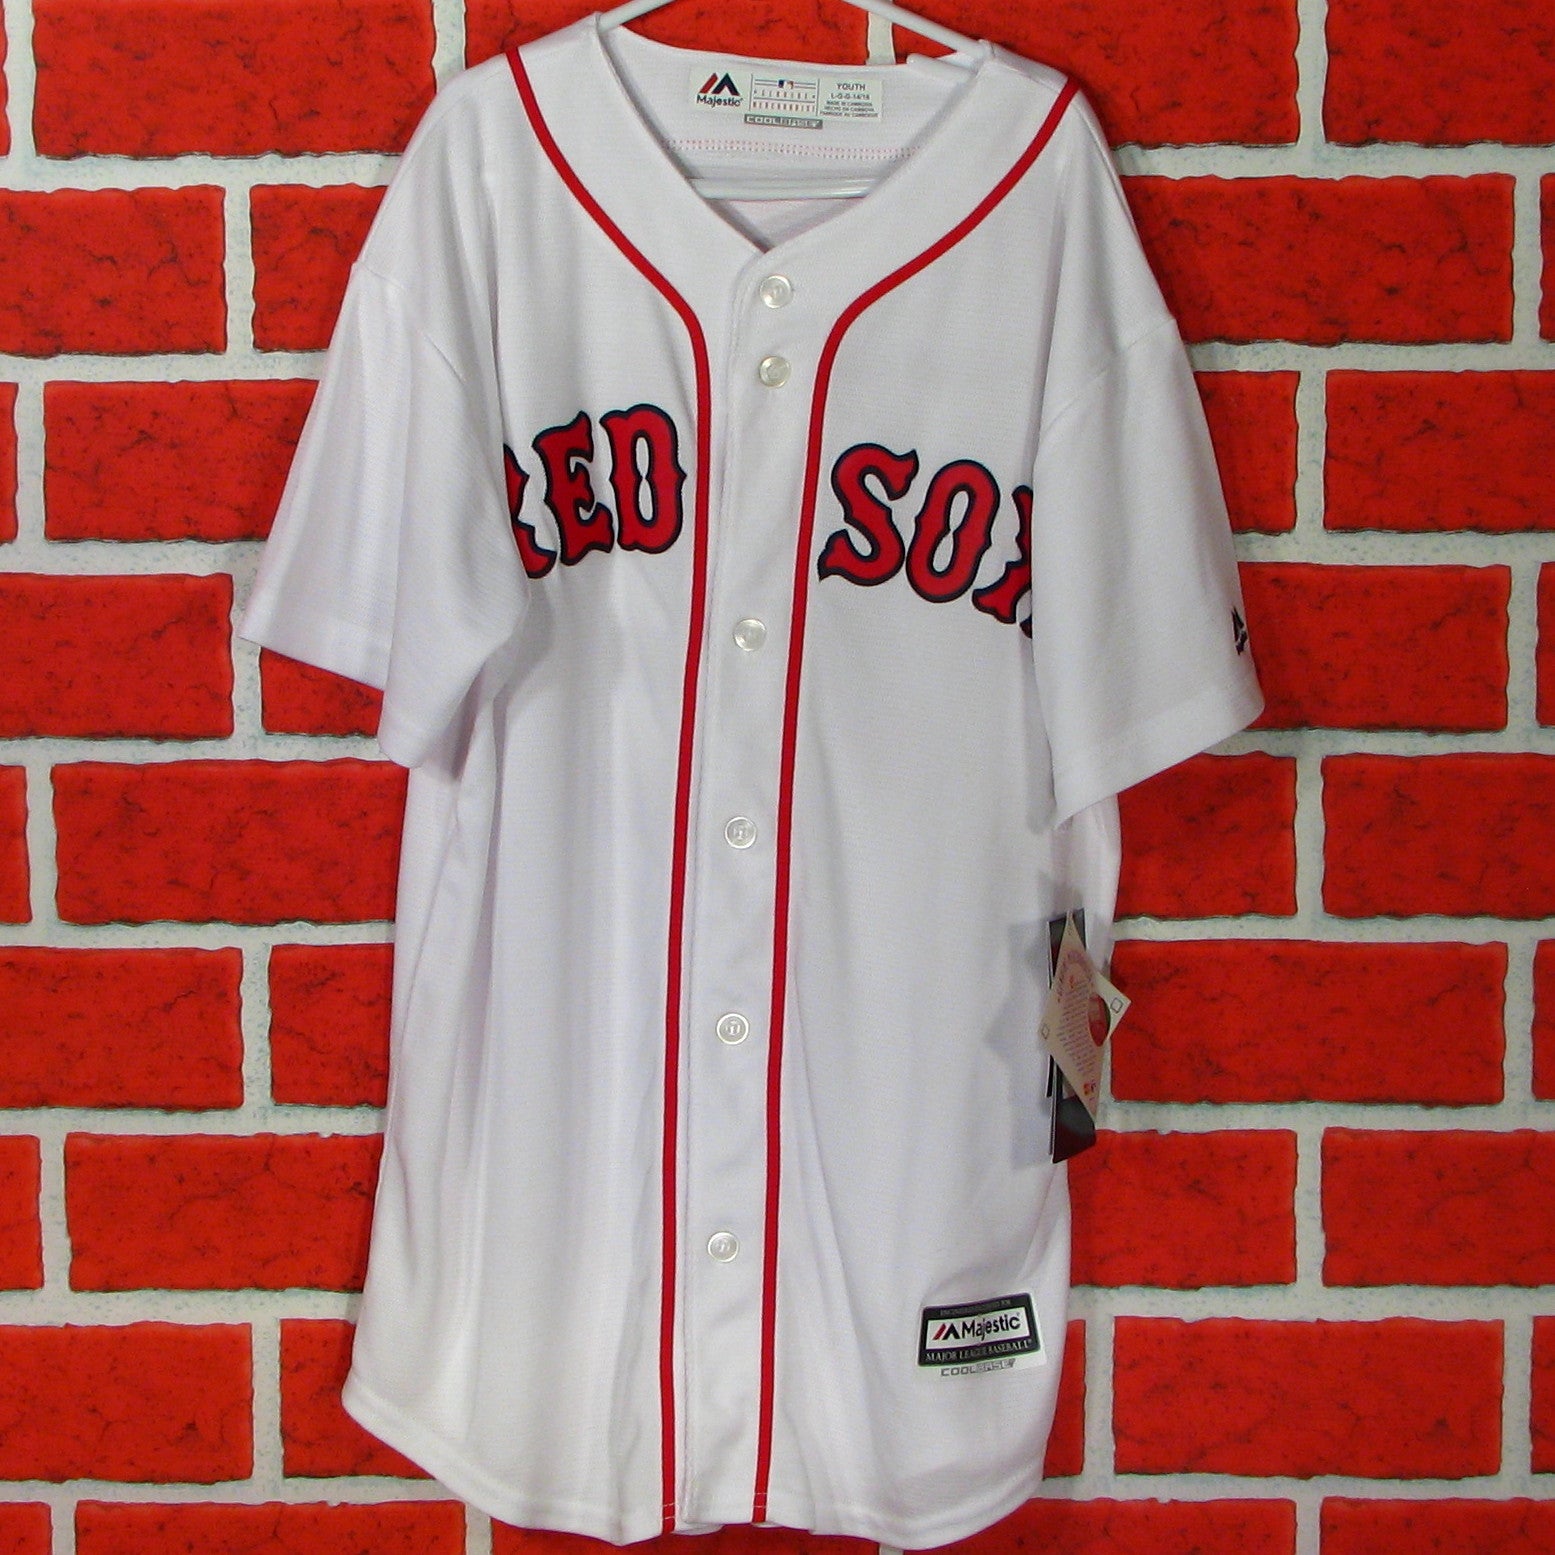 boston red sox youth jersey